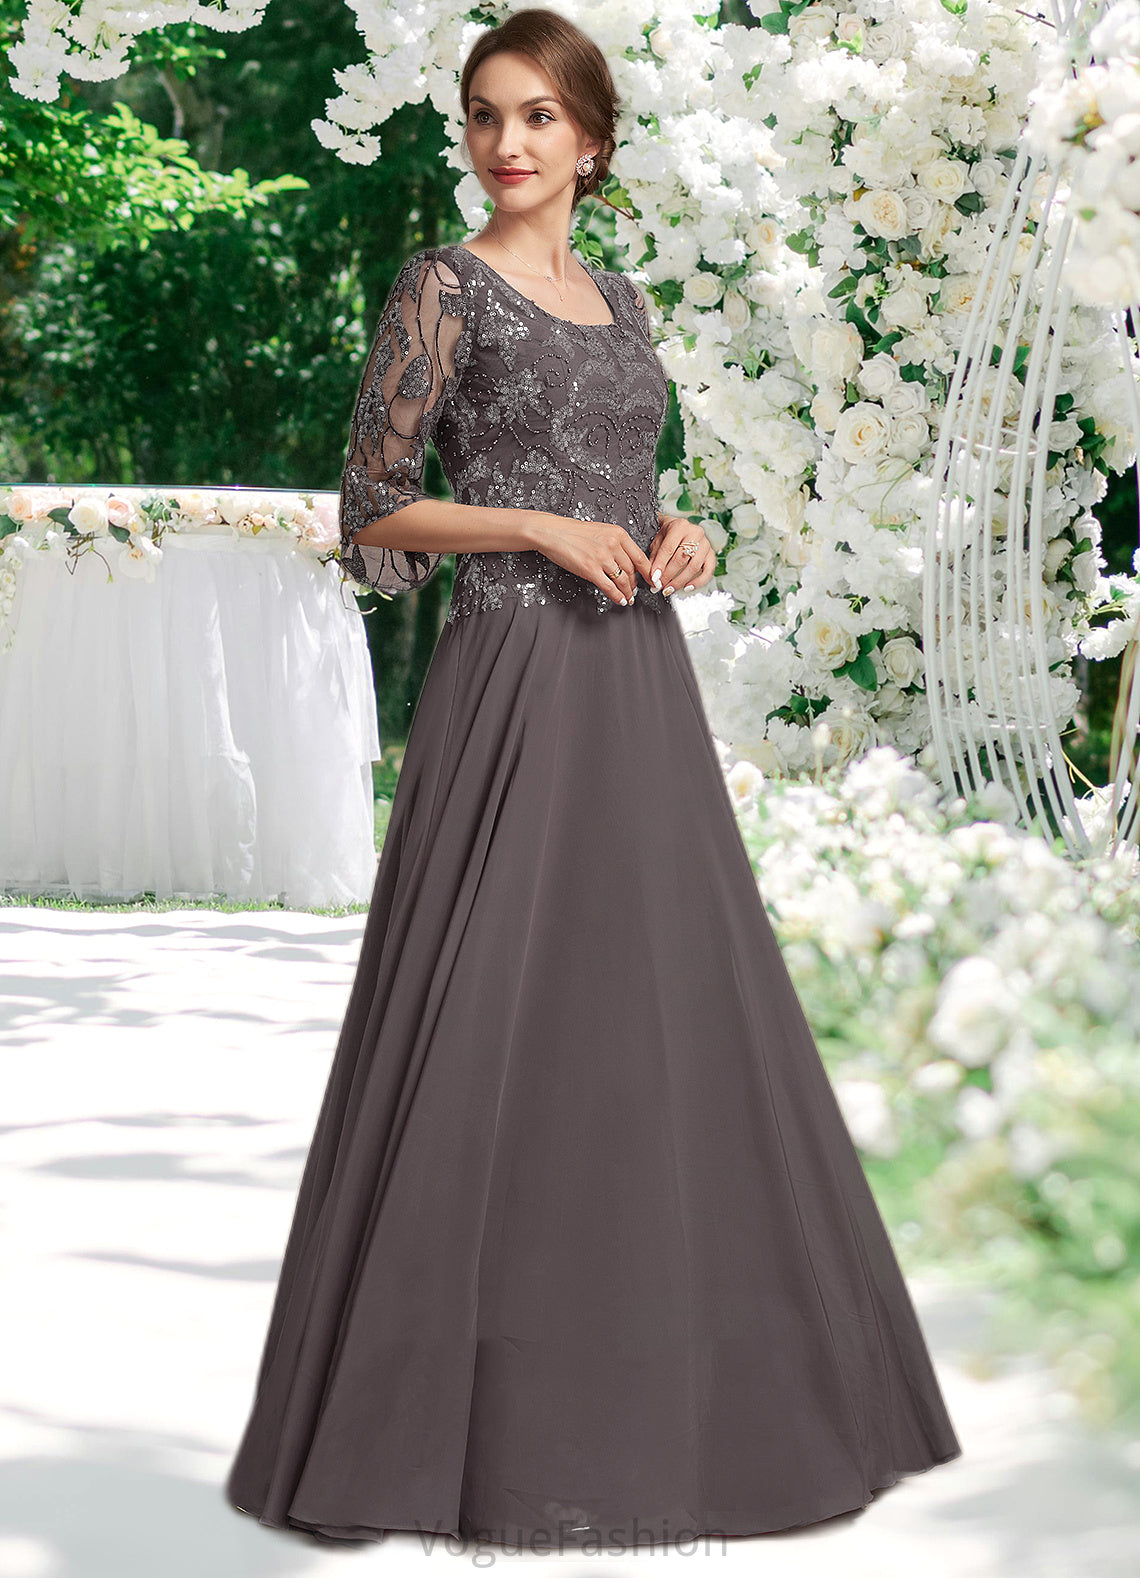 Olympia A-Line Scoop Neck Floor-Length Chiffon Lace Mother of the Bride Dress With Beading Sequins DK126P0015036